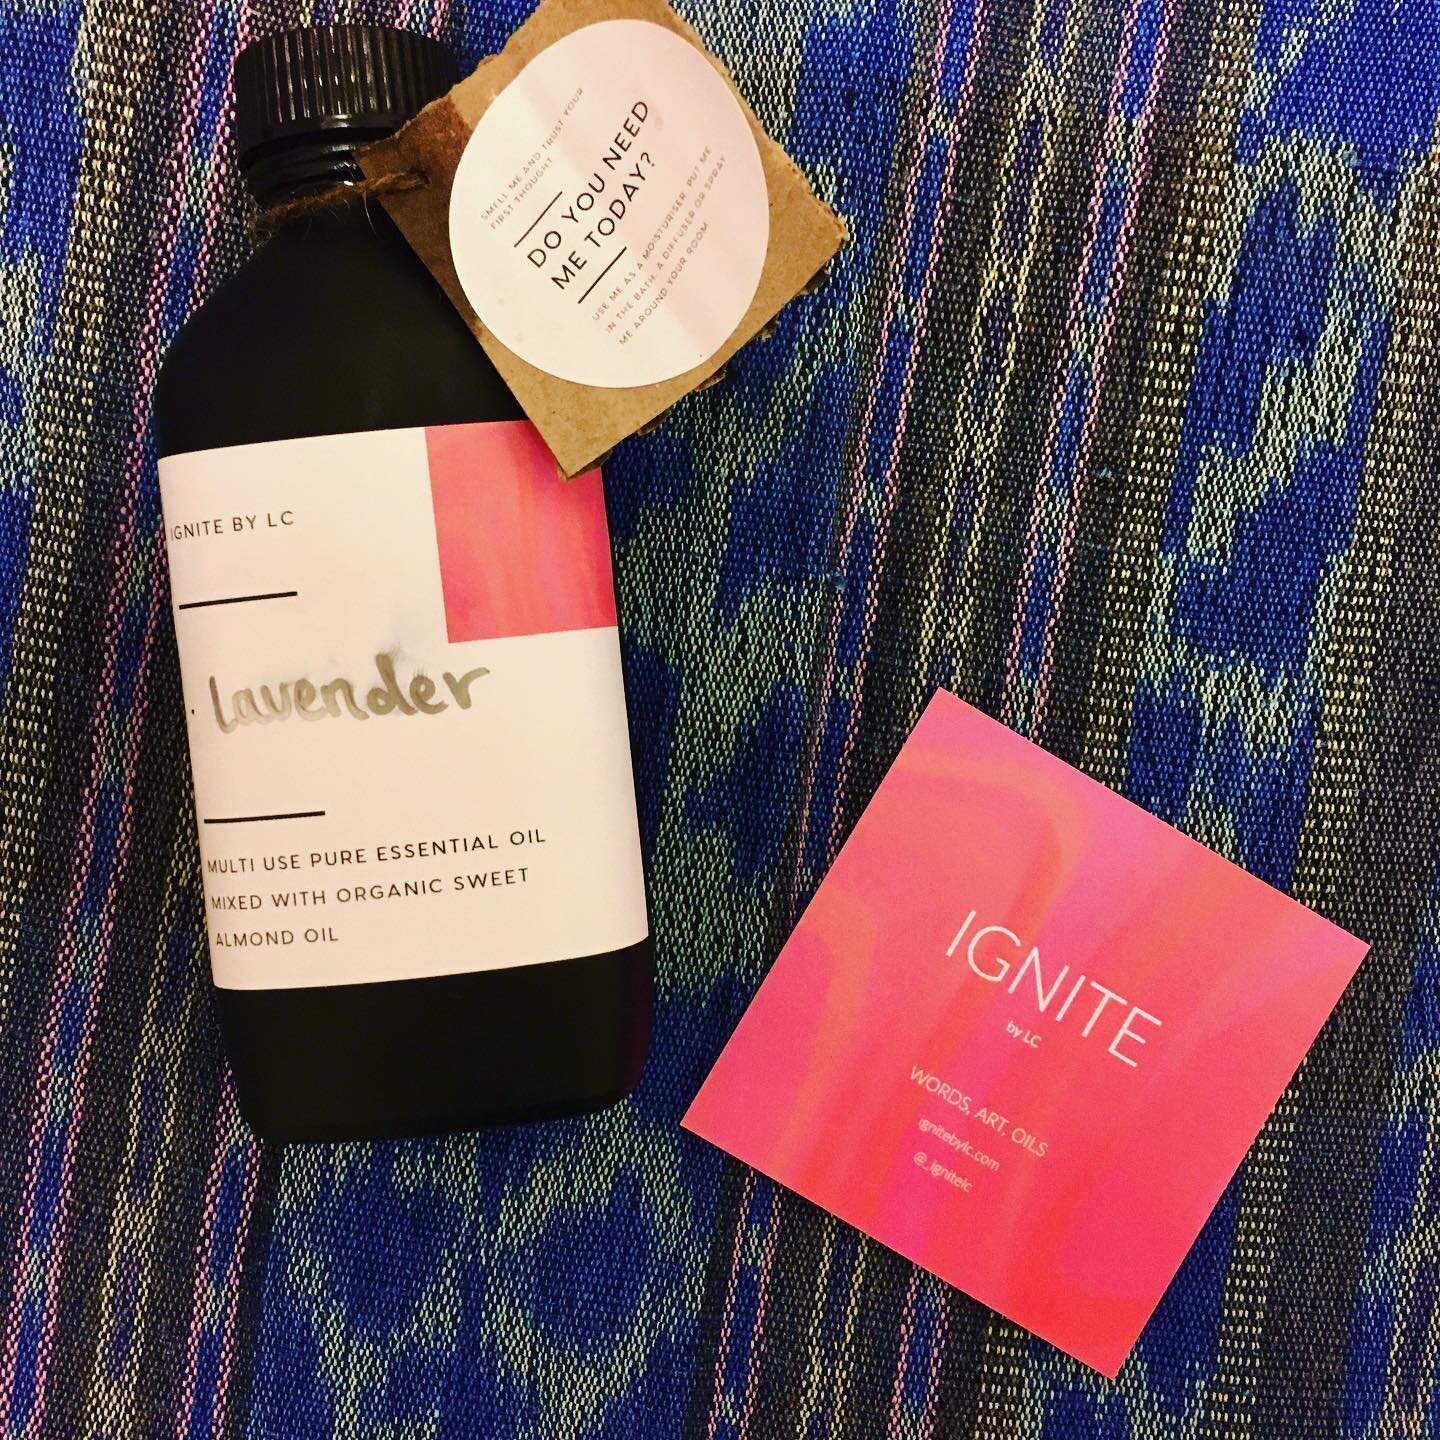 💜SPECIAL DELIVERY💜
We had a very special delivery arrive in clinic today! Our lavender blend by @_ignitelc will be right at home in this space 💫
⠀
Laura&rsquo;s oils are made from 100% pure essential oil with a focus on intuition and the intention